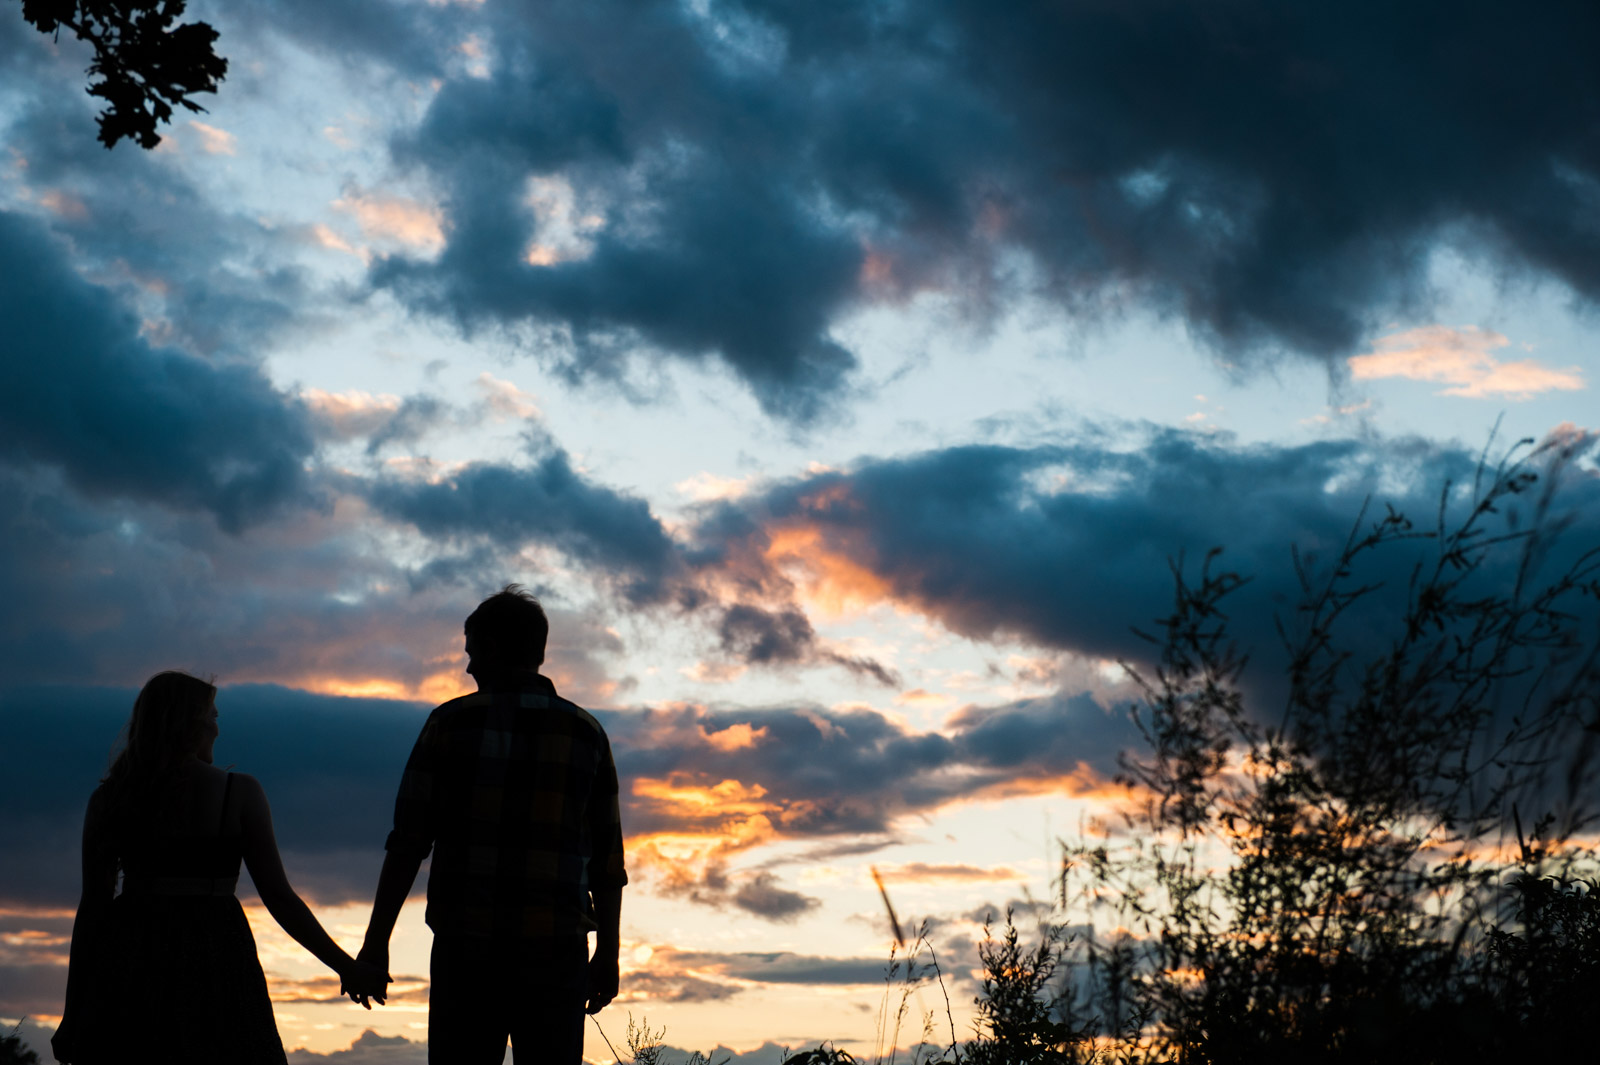 Engagement Session couple holding hands in silhouette at sunset